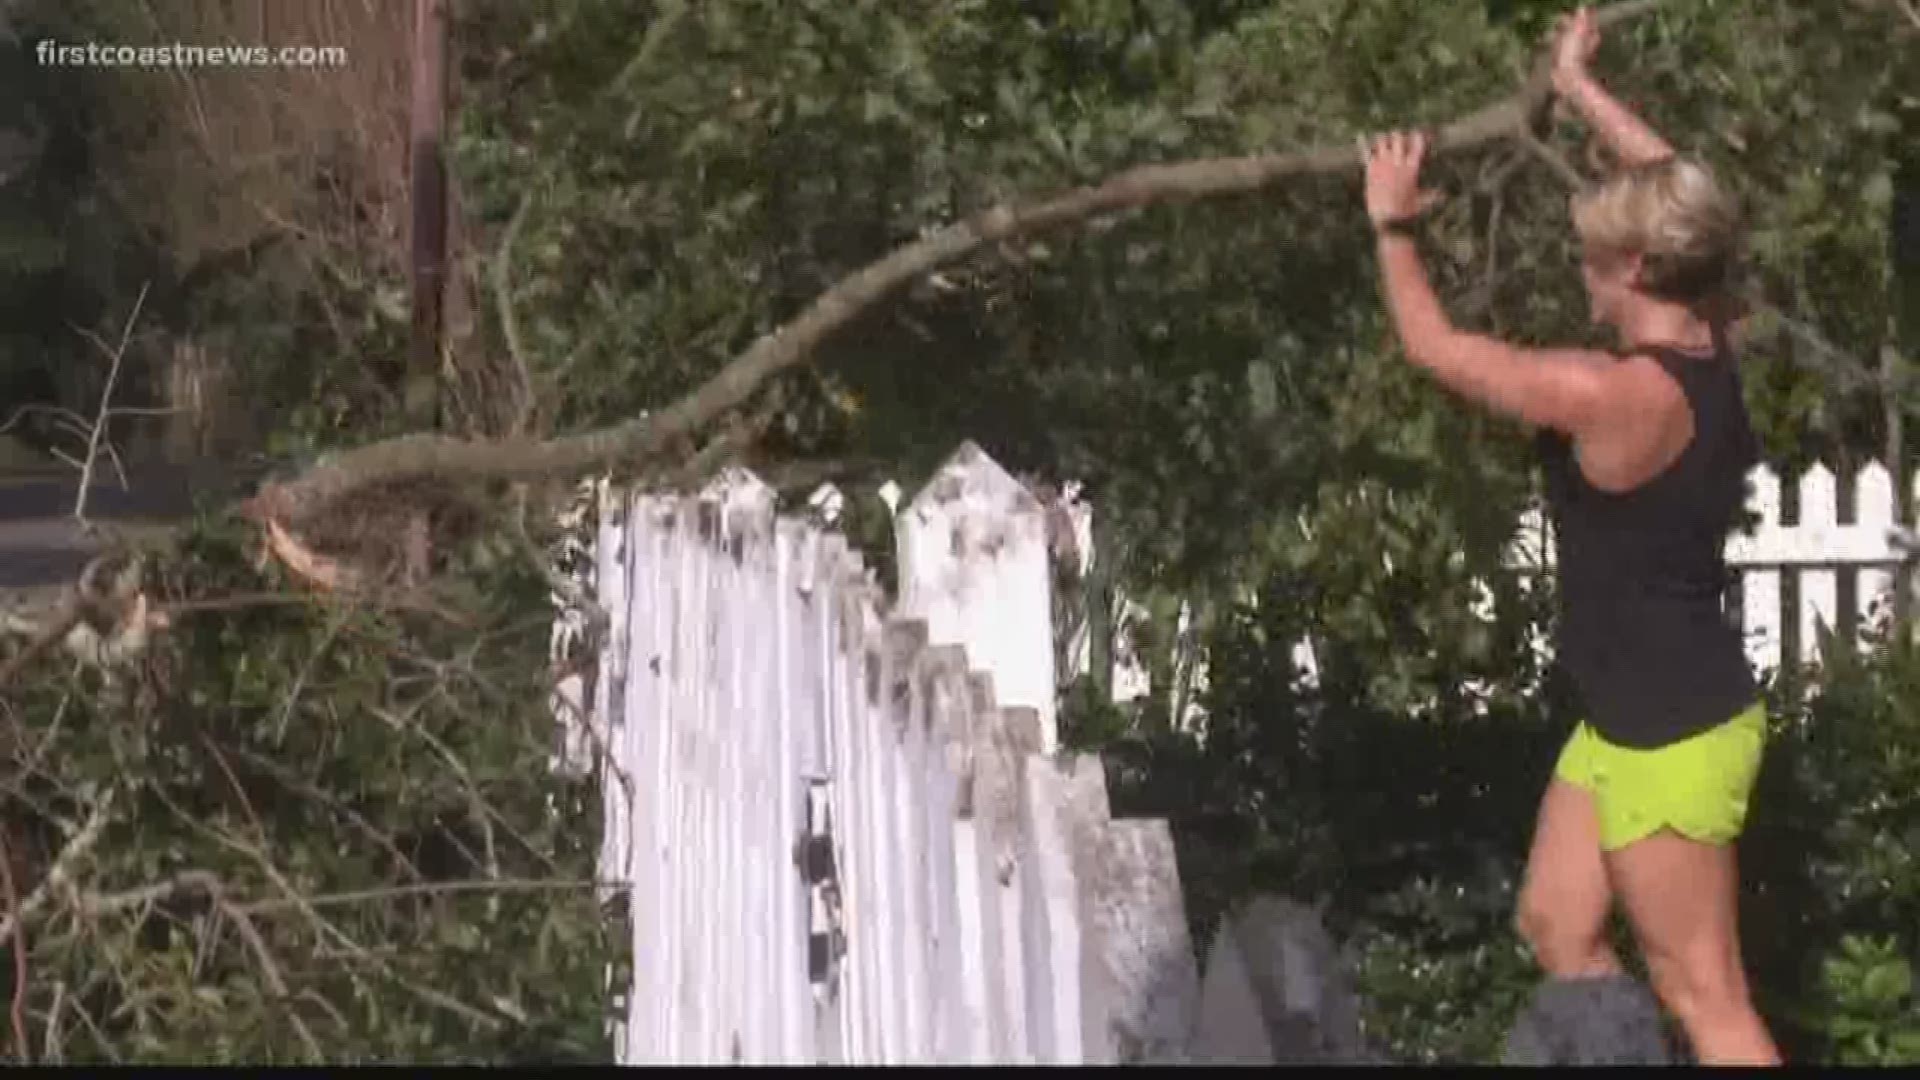 Strong winds, trees down and families left in the dark. Hurricane Michael blew through Tallahassee Wednesday, knocking down trees and power lines along the way.